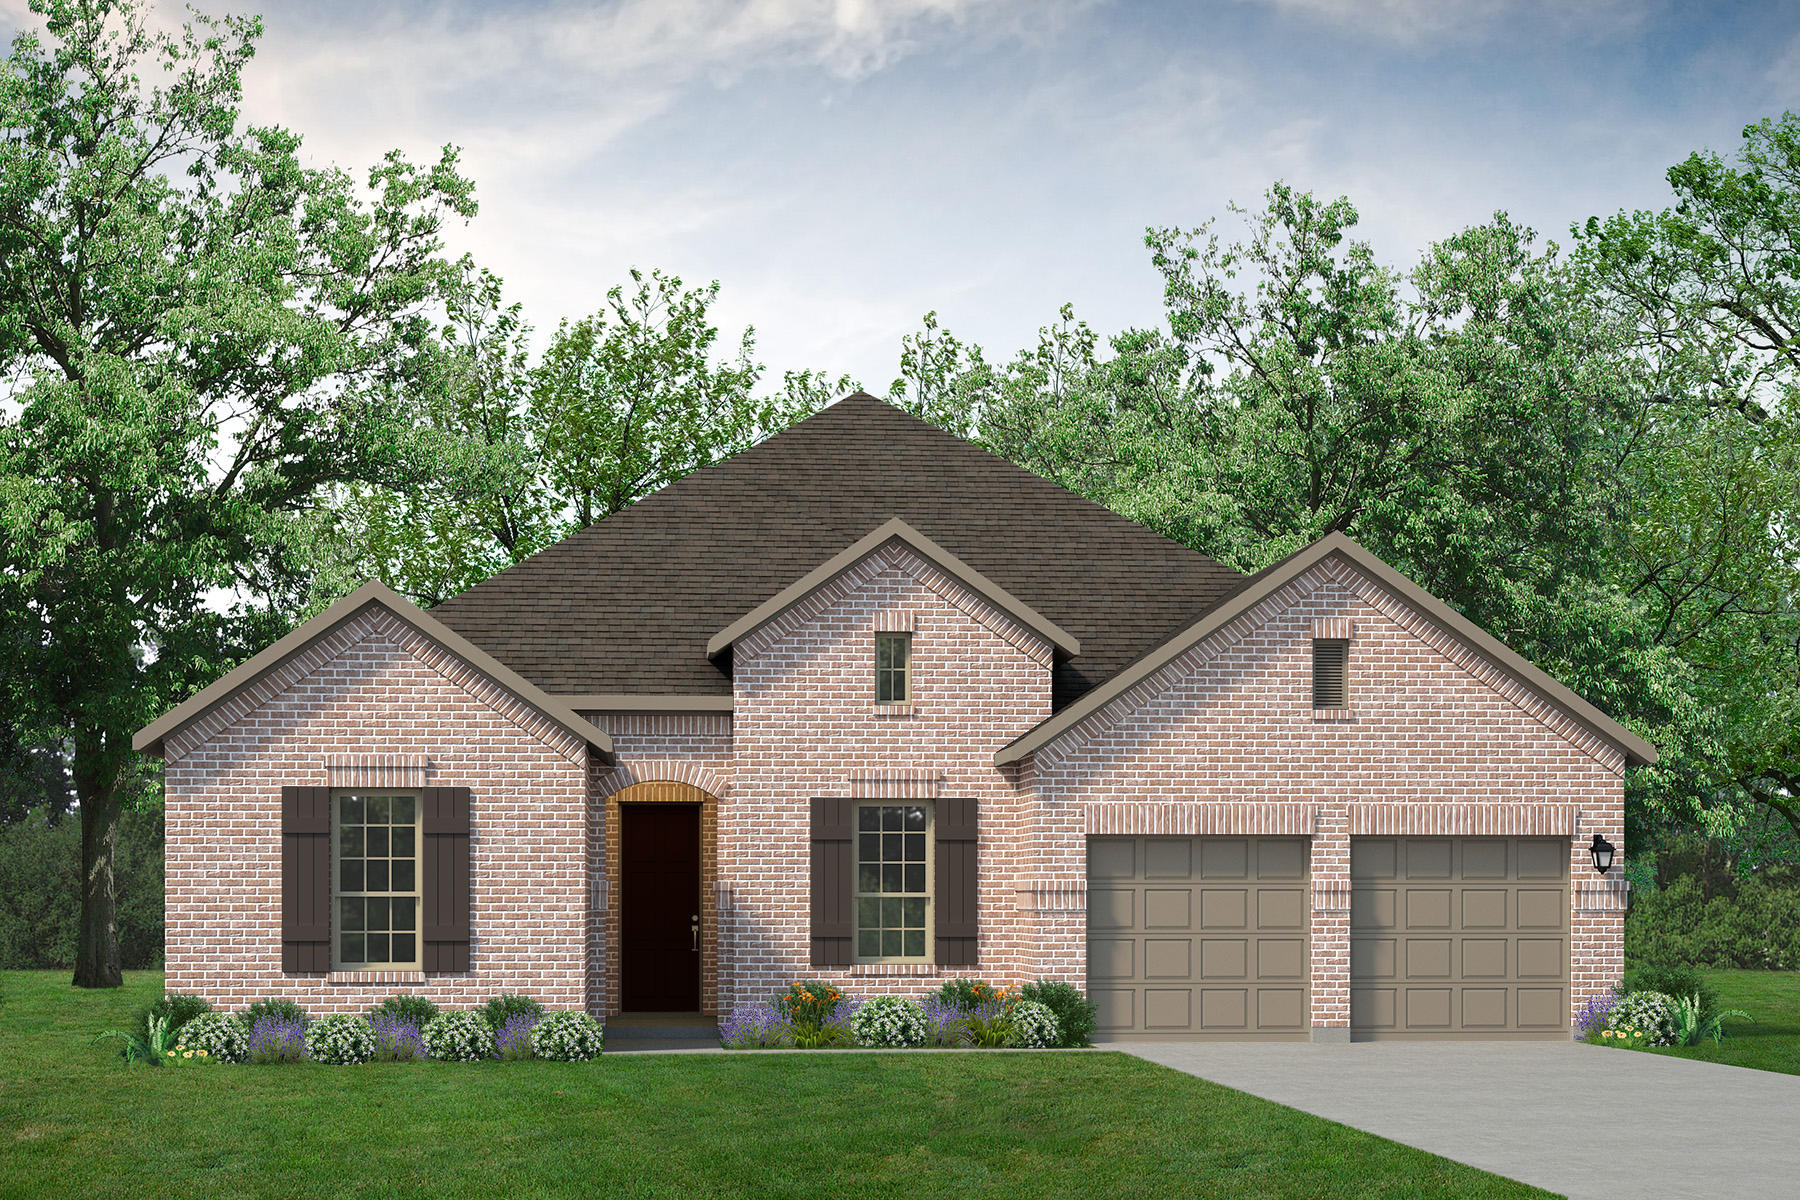 A rendering of a brick home with a garage, following the BRIDGEPORT floor plan.